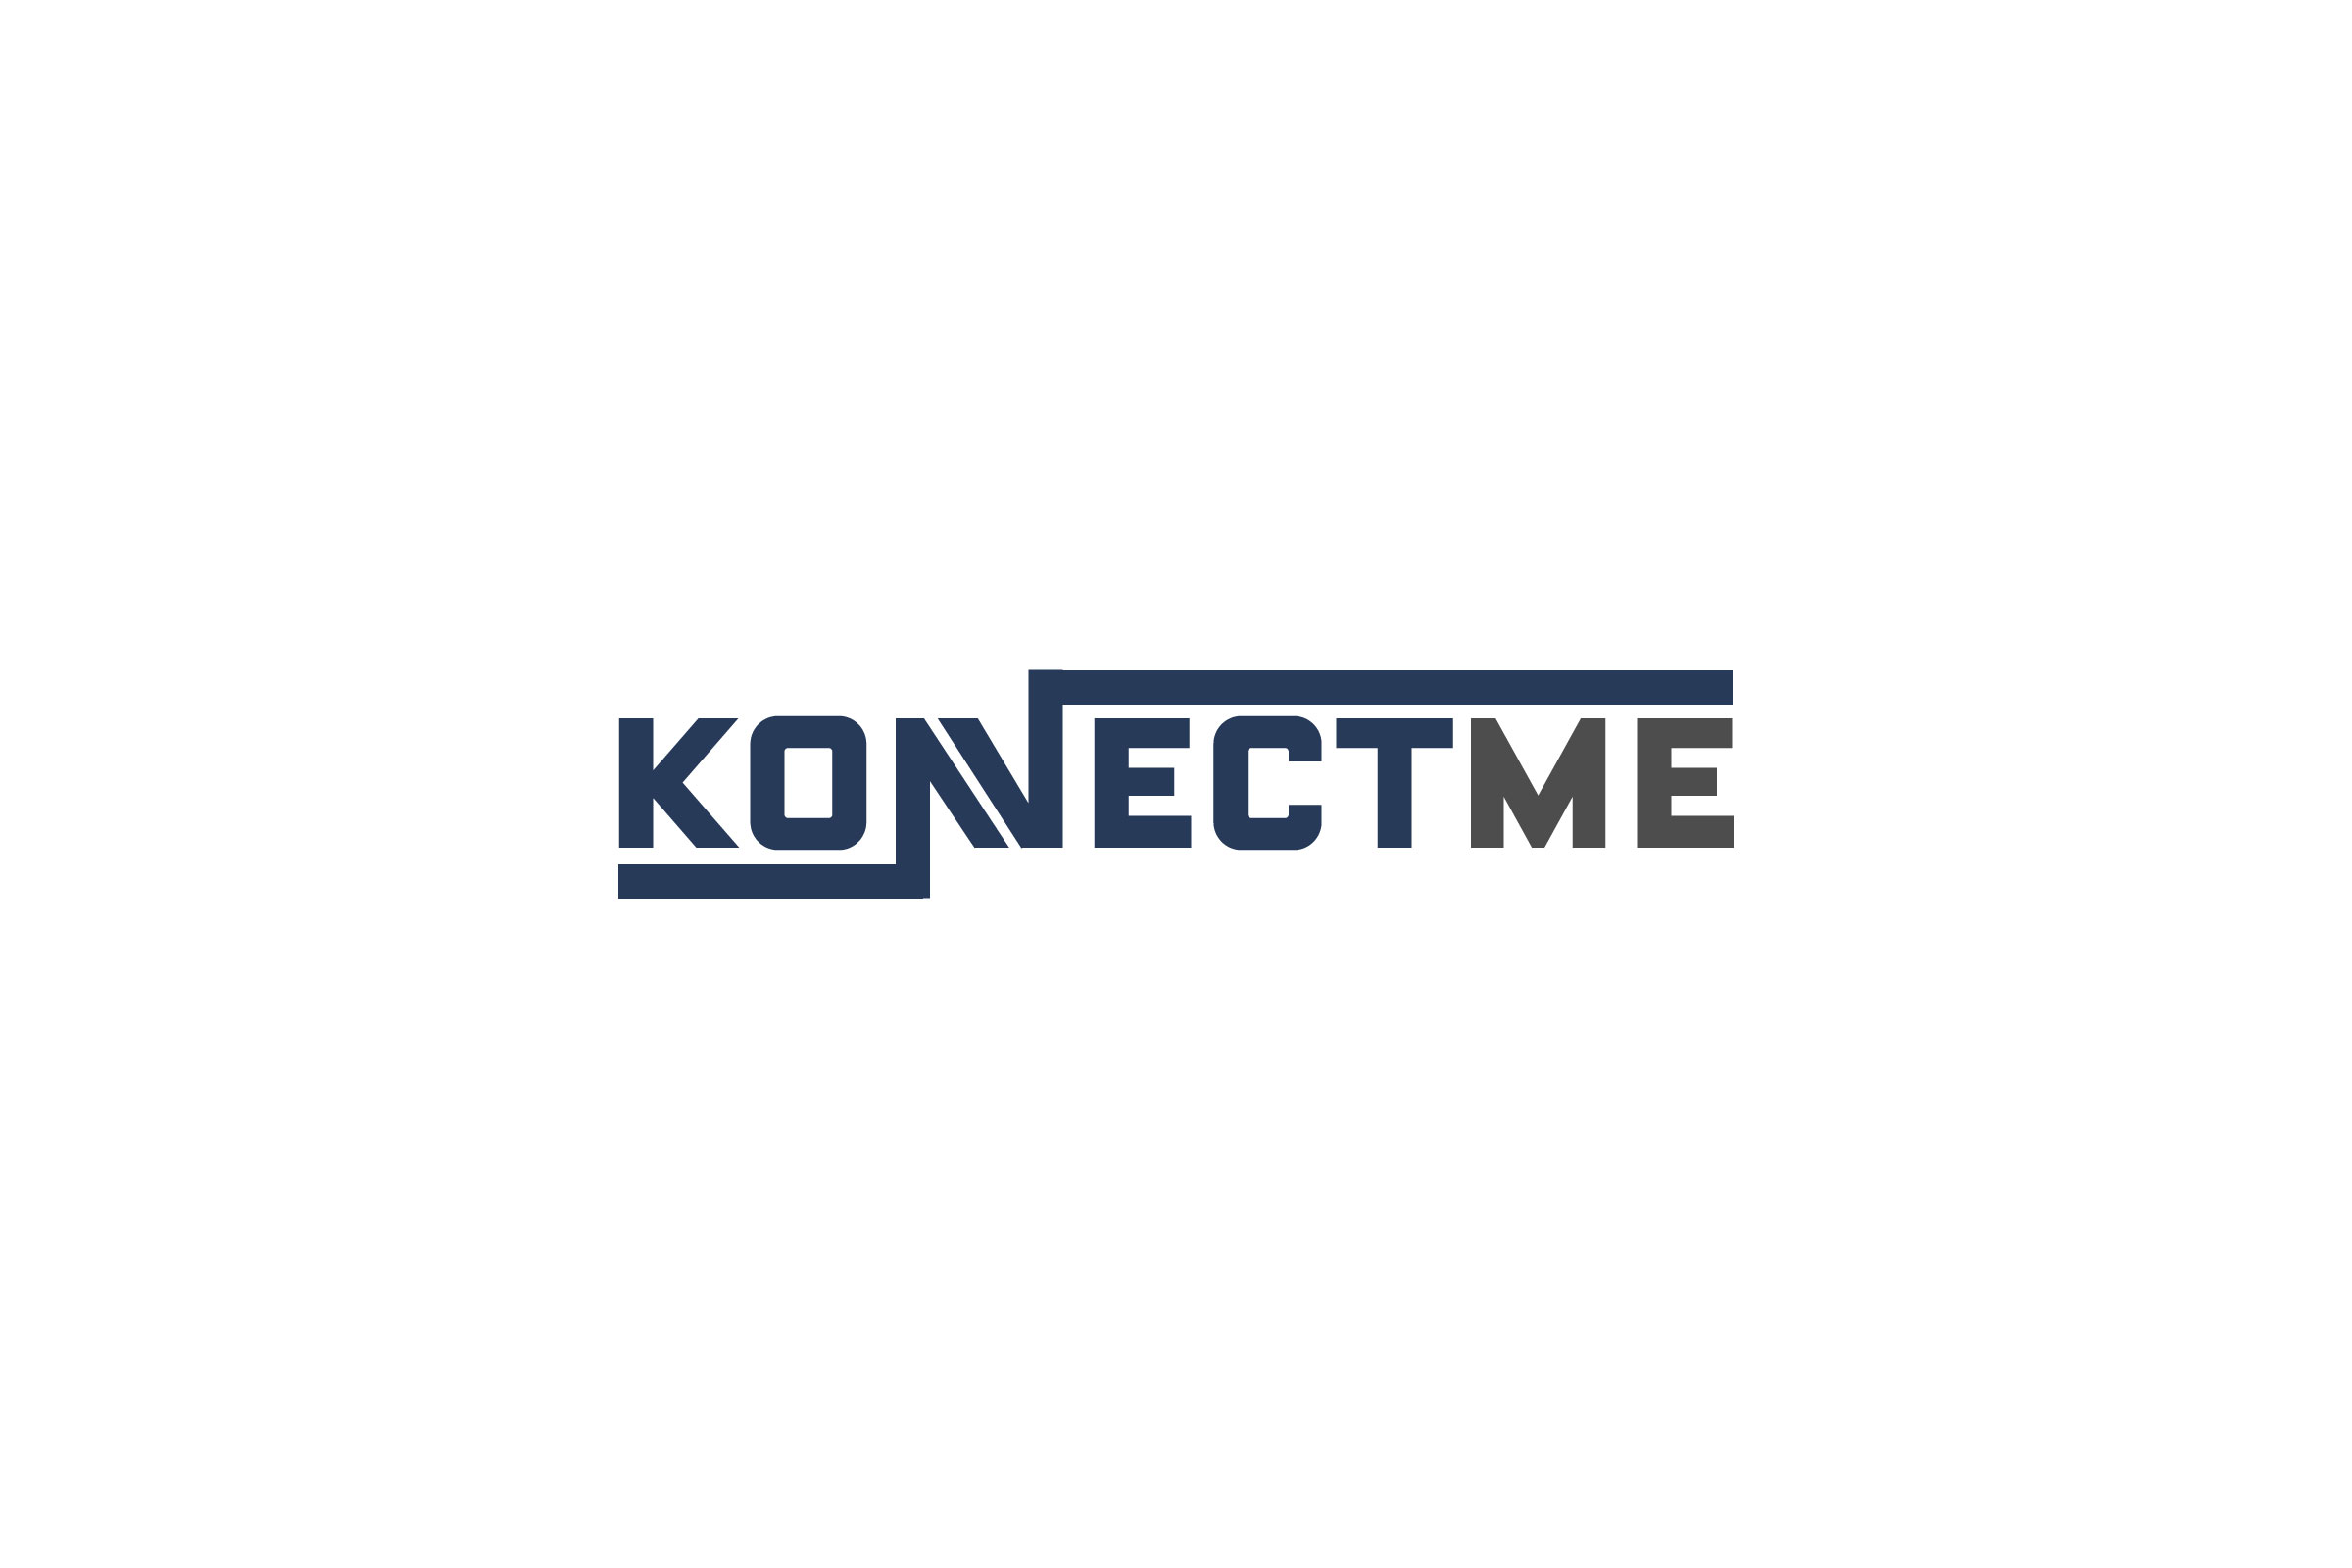 konnectme marketing solutions in surrey BC canada 123